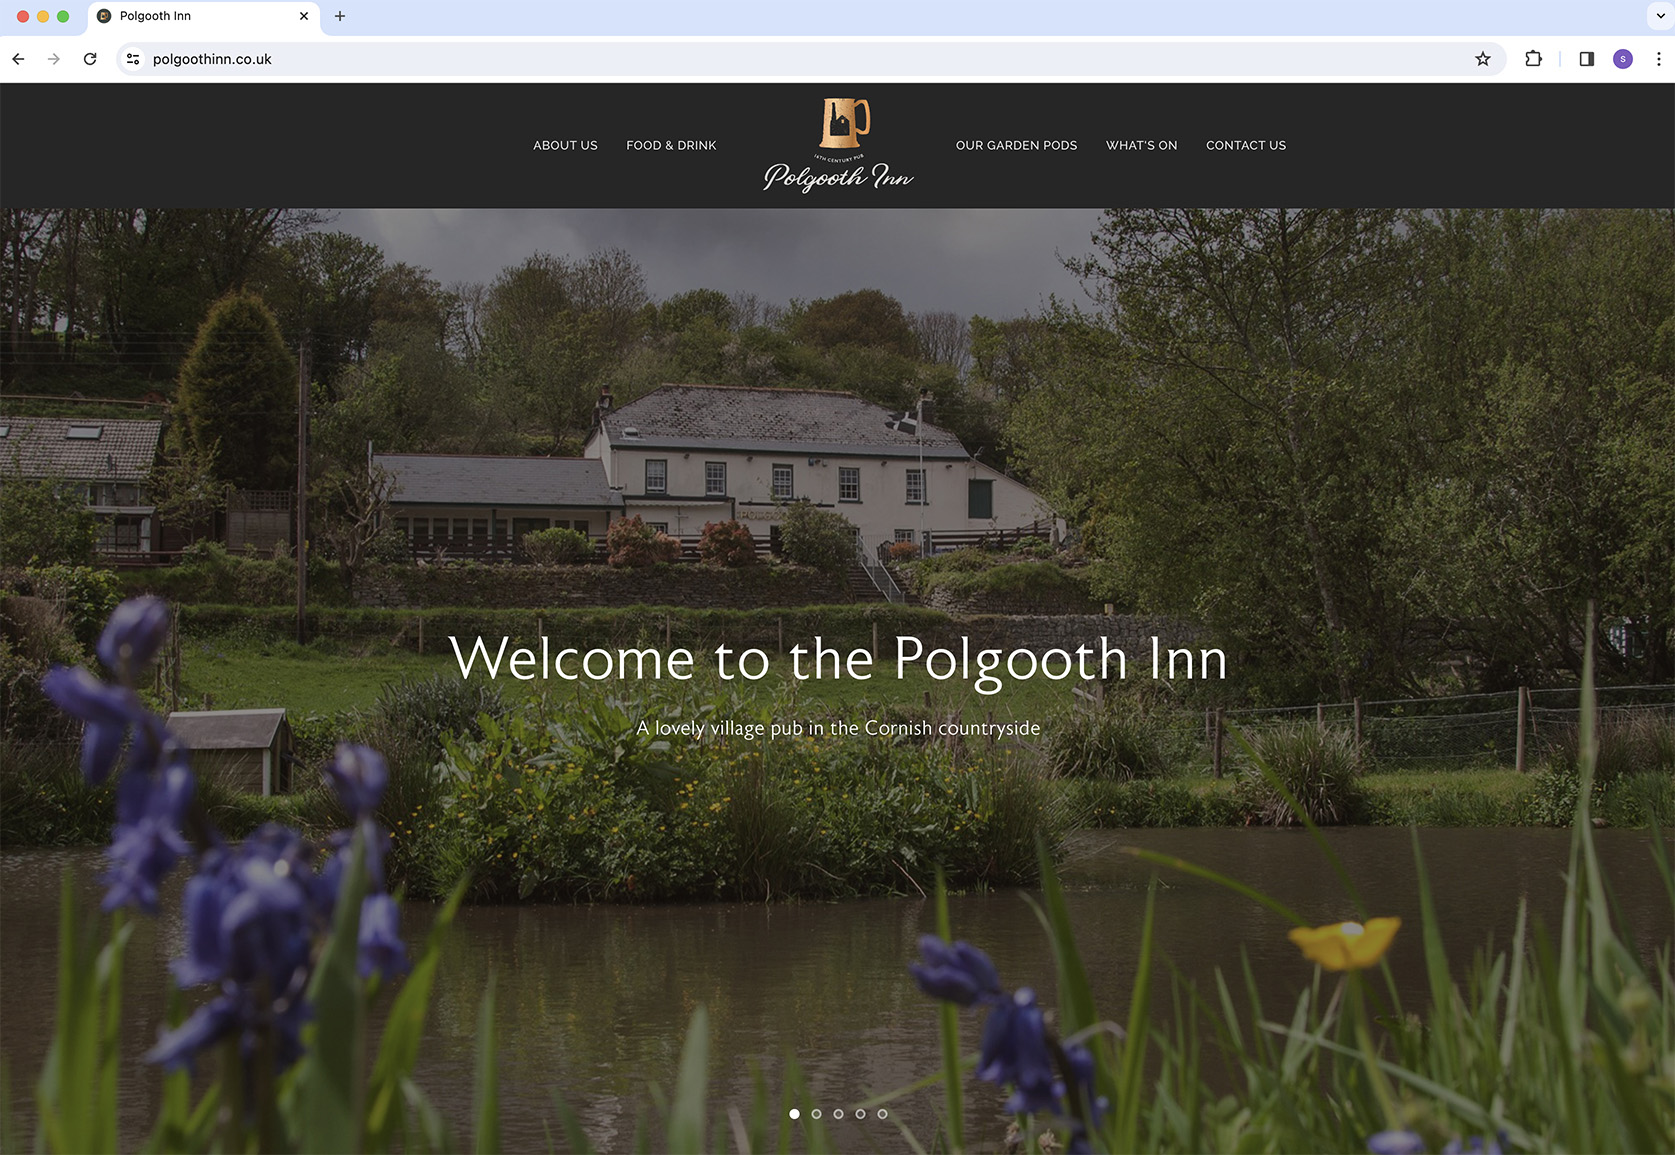 Image shows the homepage of the Polgooth Inn website